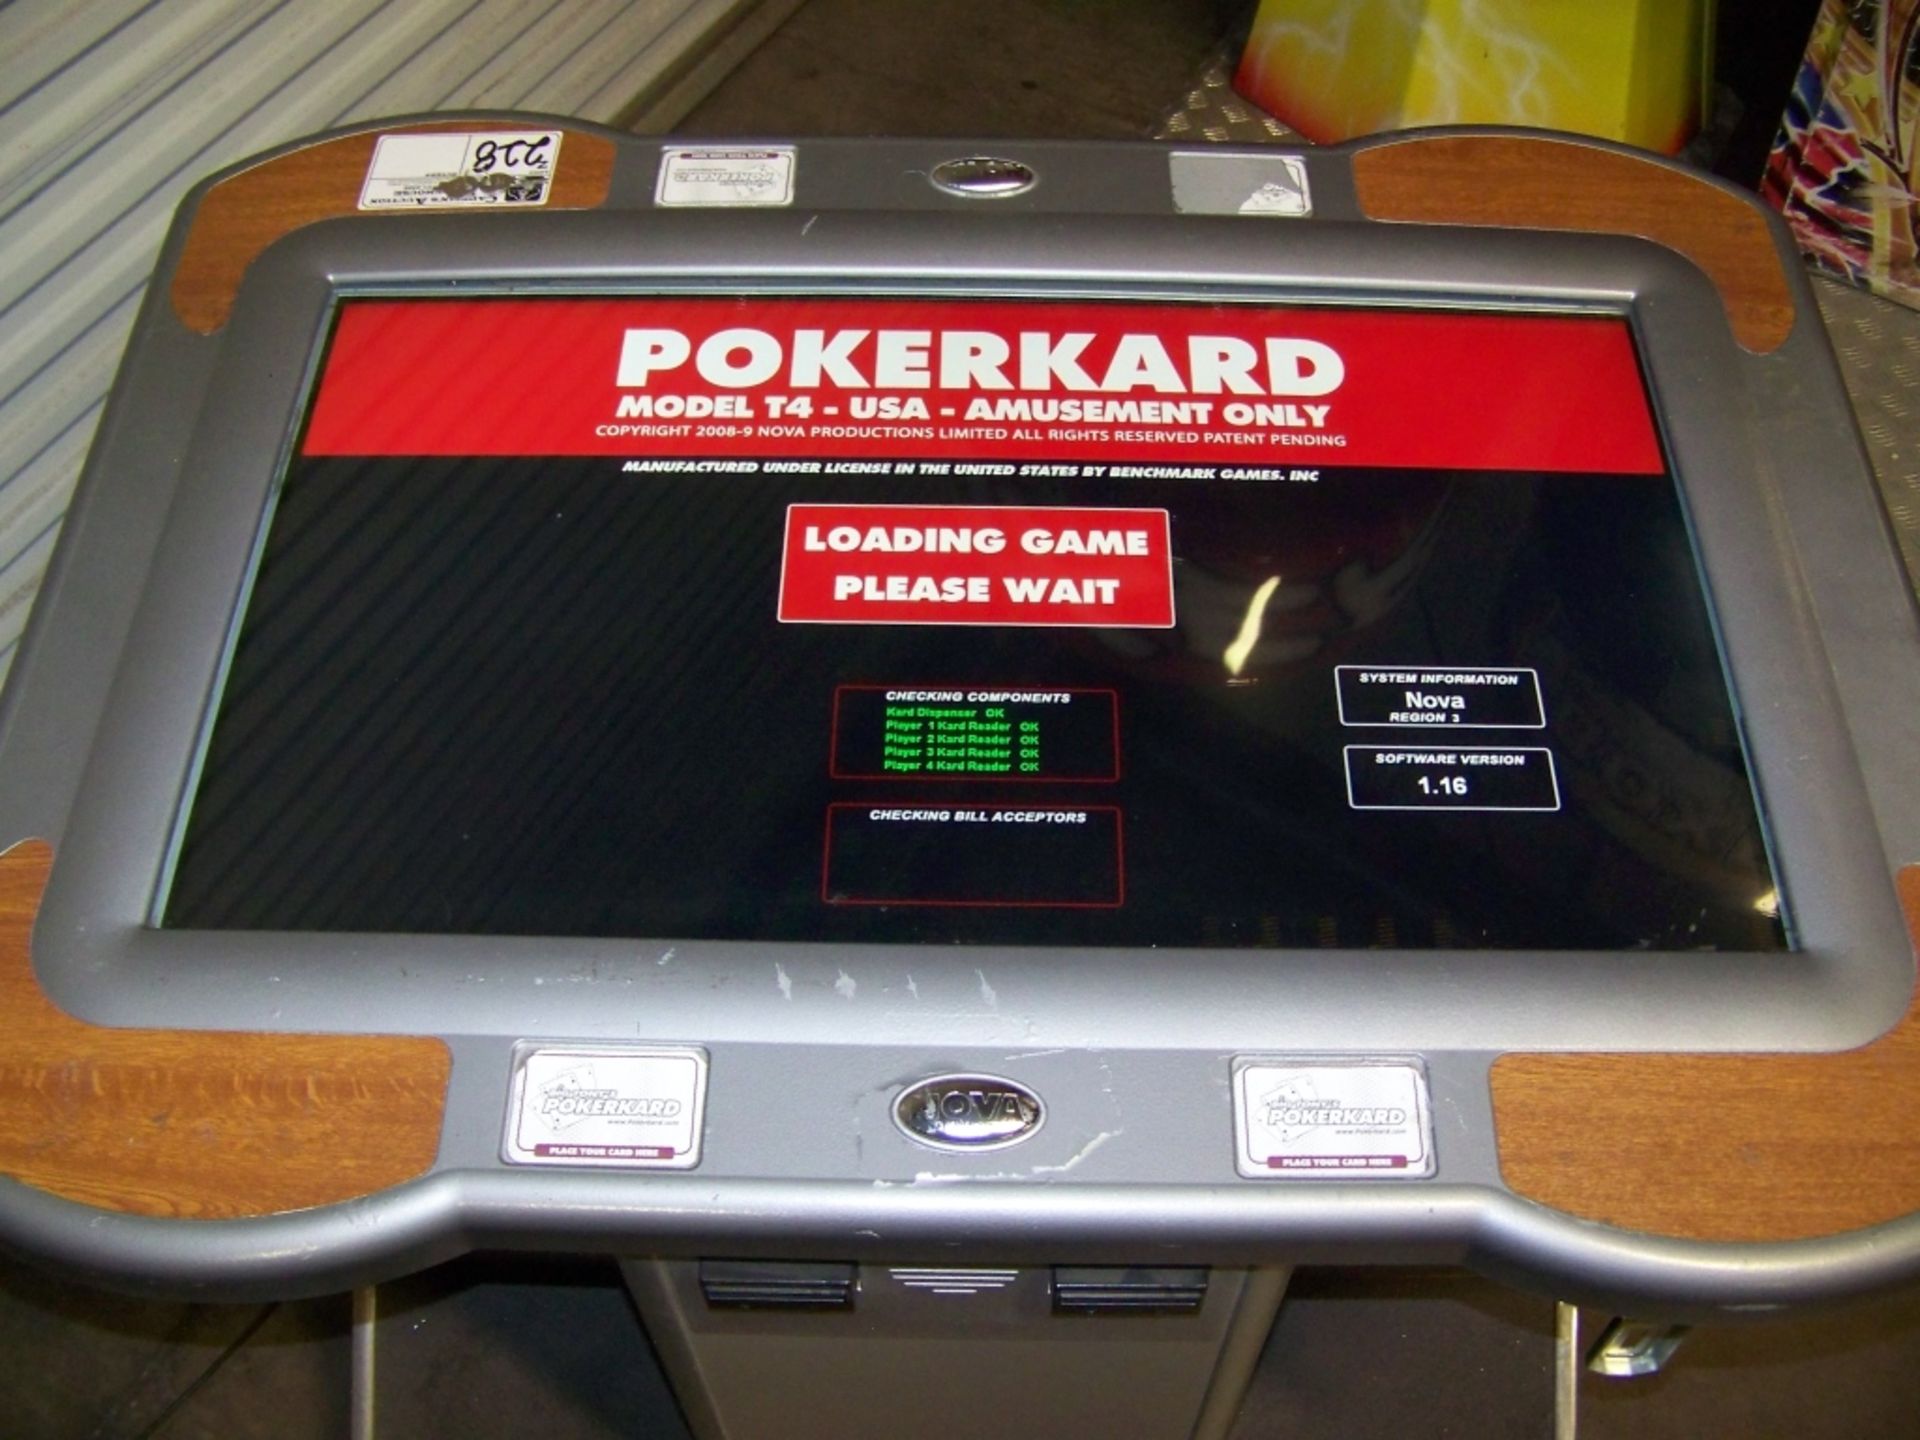 BIG TONY TEXAS HOLD'EM POKER ARCADE GAME Item is in used condition. Evidence of wear and - Image 10 of 10